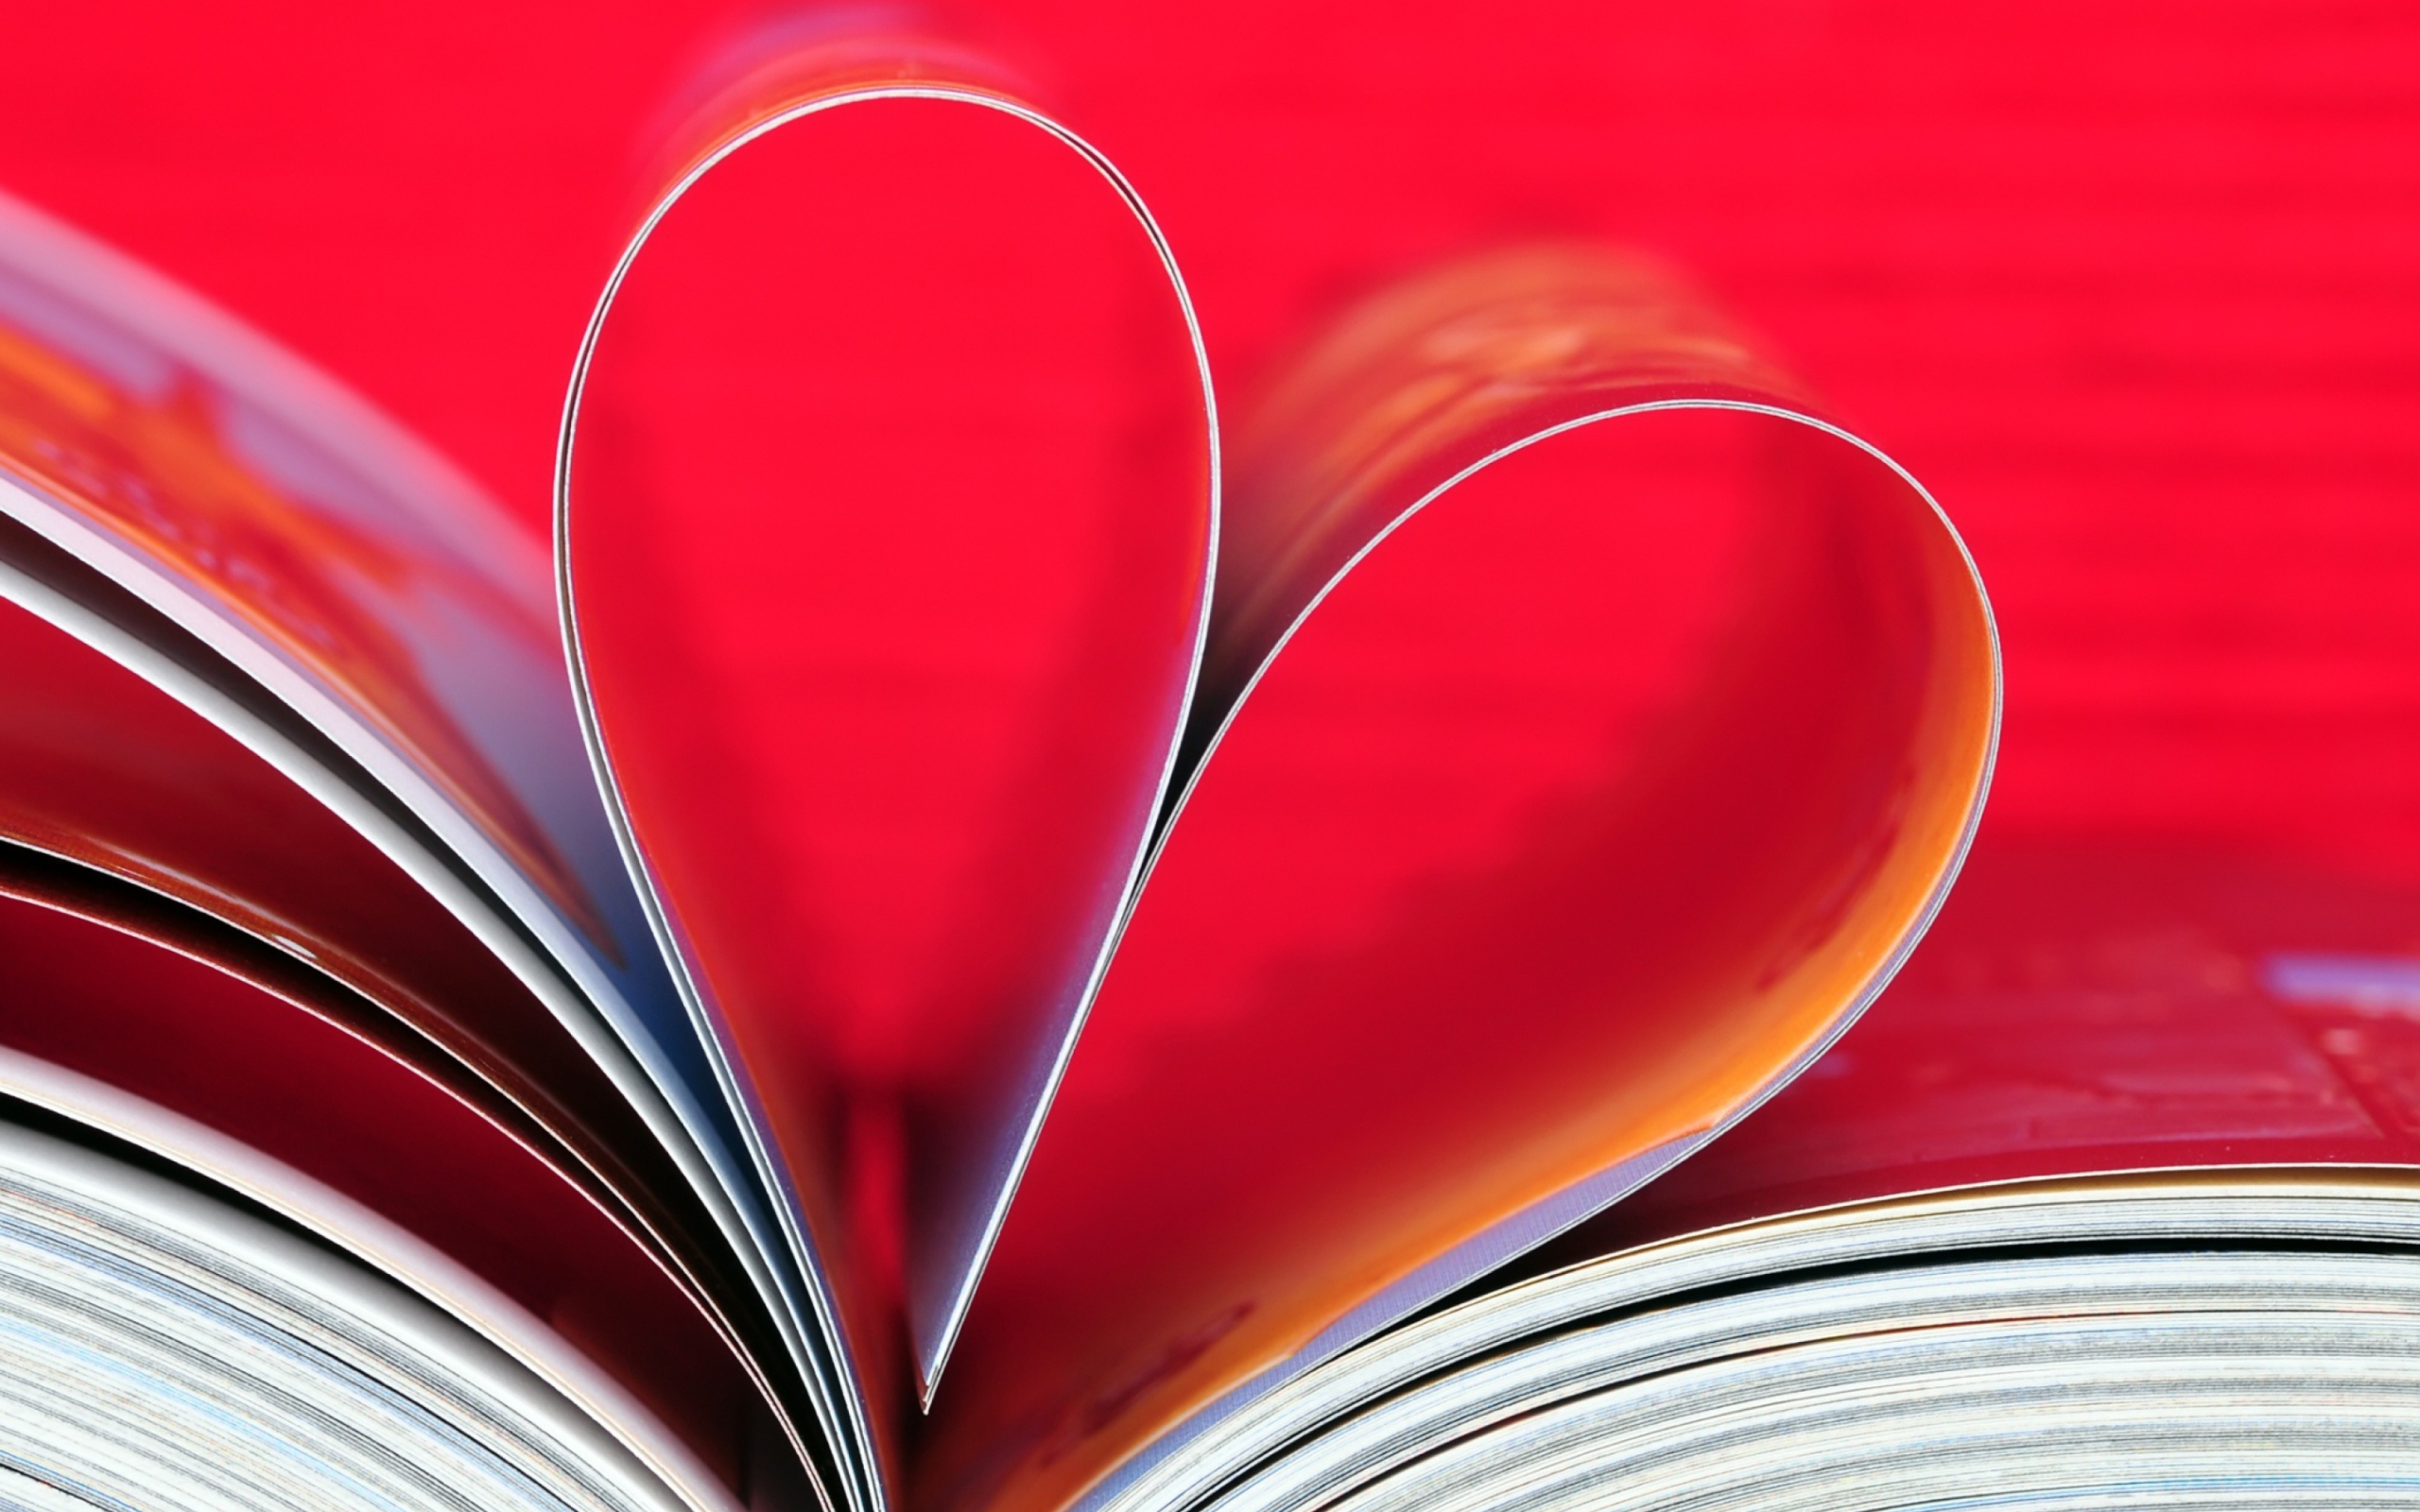 Book Pages Form A Heart wallpaper 2560x1600